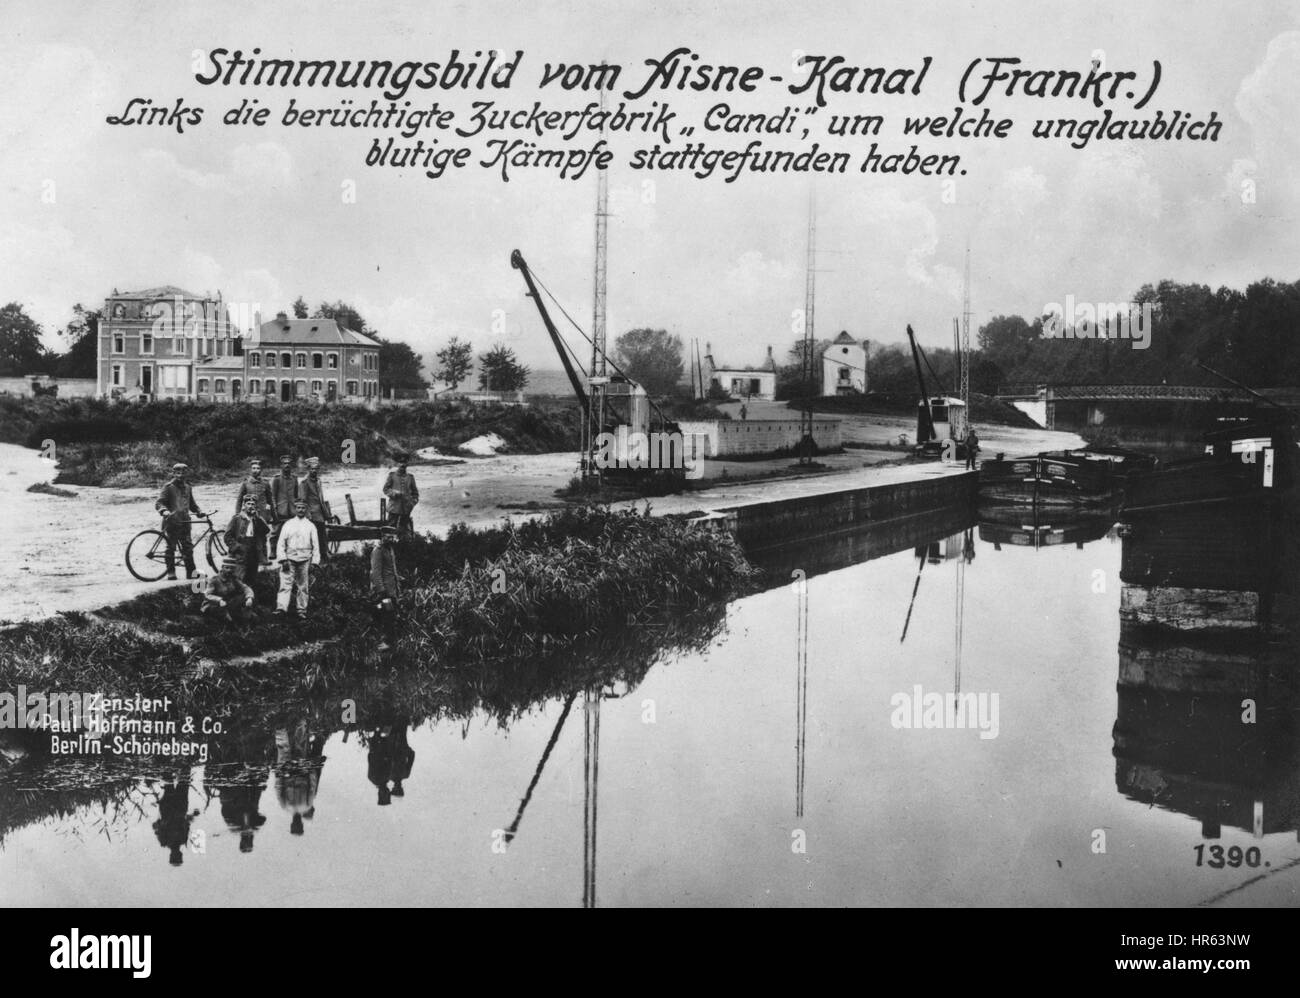 German World War I photographic postcard depicting the Aisne Canal in northern France, 1915. From the New York Public Library. Stock Photo